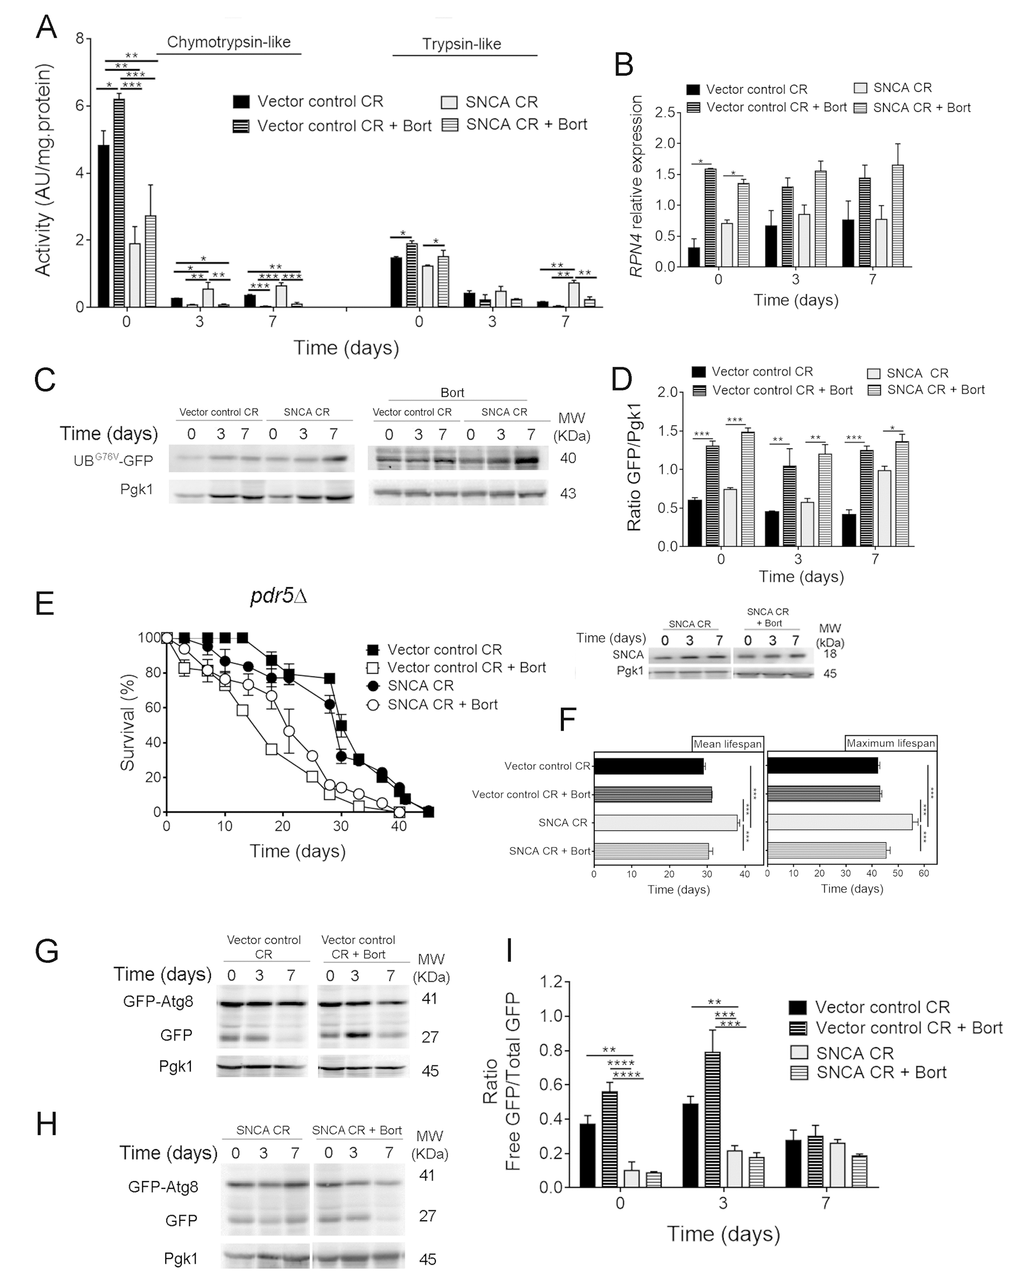 Pharmacological inhibition of the ubiquitin-proteasome system activity decreases lifespan of α-synuclein (SNCA)-expressing cells grown under caloric restriction but has no major impact on autophagy. (A) Chymotrypsin- and trypsin like activities. The assay was normalized to the total protein amount. Significance was determined by two-way ANOVA (*p≤0.05, **p≤0.01, ***p≤0.001) between cells grown under CR (0.5% glucose) conditions expressing vector control or SNCA in the presence or absence of bortezomib (Bort). (B) RPN4 mRNA relative expression levels as described in the legend of Figure 1. (C) UPS activity measured by monitoring the ubiquitin/proteasome-dependent proteolysis of the short-lived protein UBG76V-GFP. GFP was detected by Western blotting using a GFP-specific antibody. (D) Graphical representation of GFP/Pgk1 obtained by densitometric analysis. Statistical significance represented in (B) and (D) was determined by Student's t-test (*p≤0.05, **p≤0.01, ***p≤0.001) comparing caloric restricted vector control or SNCA-expressing cells in the presence or absence of Bort. (E) Chronological lifespan (CLS) and SNCA levels of pdr5Δ cells expressing SNCA grown under CR conditions, in the presence or absence of Bort. (F) Mean (50% survival) and maximum (10% survival) lifespans determined from curve fitting of the survival data from CLS. Significance was determined by two-way ANOVA (***p≤0.001) between cells grown under CR conditions expressing vector control or SNCA in the presence or absence of Bort. Autophagy flux assessed by the GFP-Atg8 processing assay (immunoblotting analysis with antibody against GFP) of caloric restricted cells expressing vector control (G) or SNCA (H) in the absence or presence of Bort. Blots represented in (G) are from the same gel, as in (H). (I) Densitometric analysis of the ratio between the free GFP versus the total GFP. Bands were quantified by Quantity One software. Significance of the data was determined by two-way ANOVA (**p≤0.01, ***p≤0.001, ****p≤0.0001) between cells grown under CR conditions expressing vector control or SNCA in the presence or absence of Bort. Data represents mean ± SEM of at least three biological independent replicas. The error bars represent the standard error of the mean (SEM).